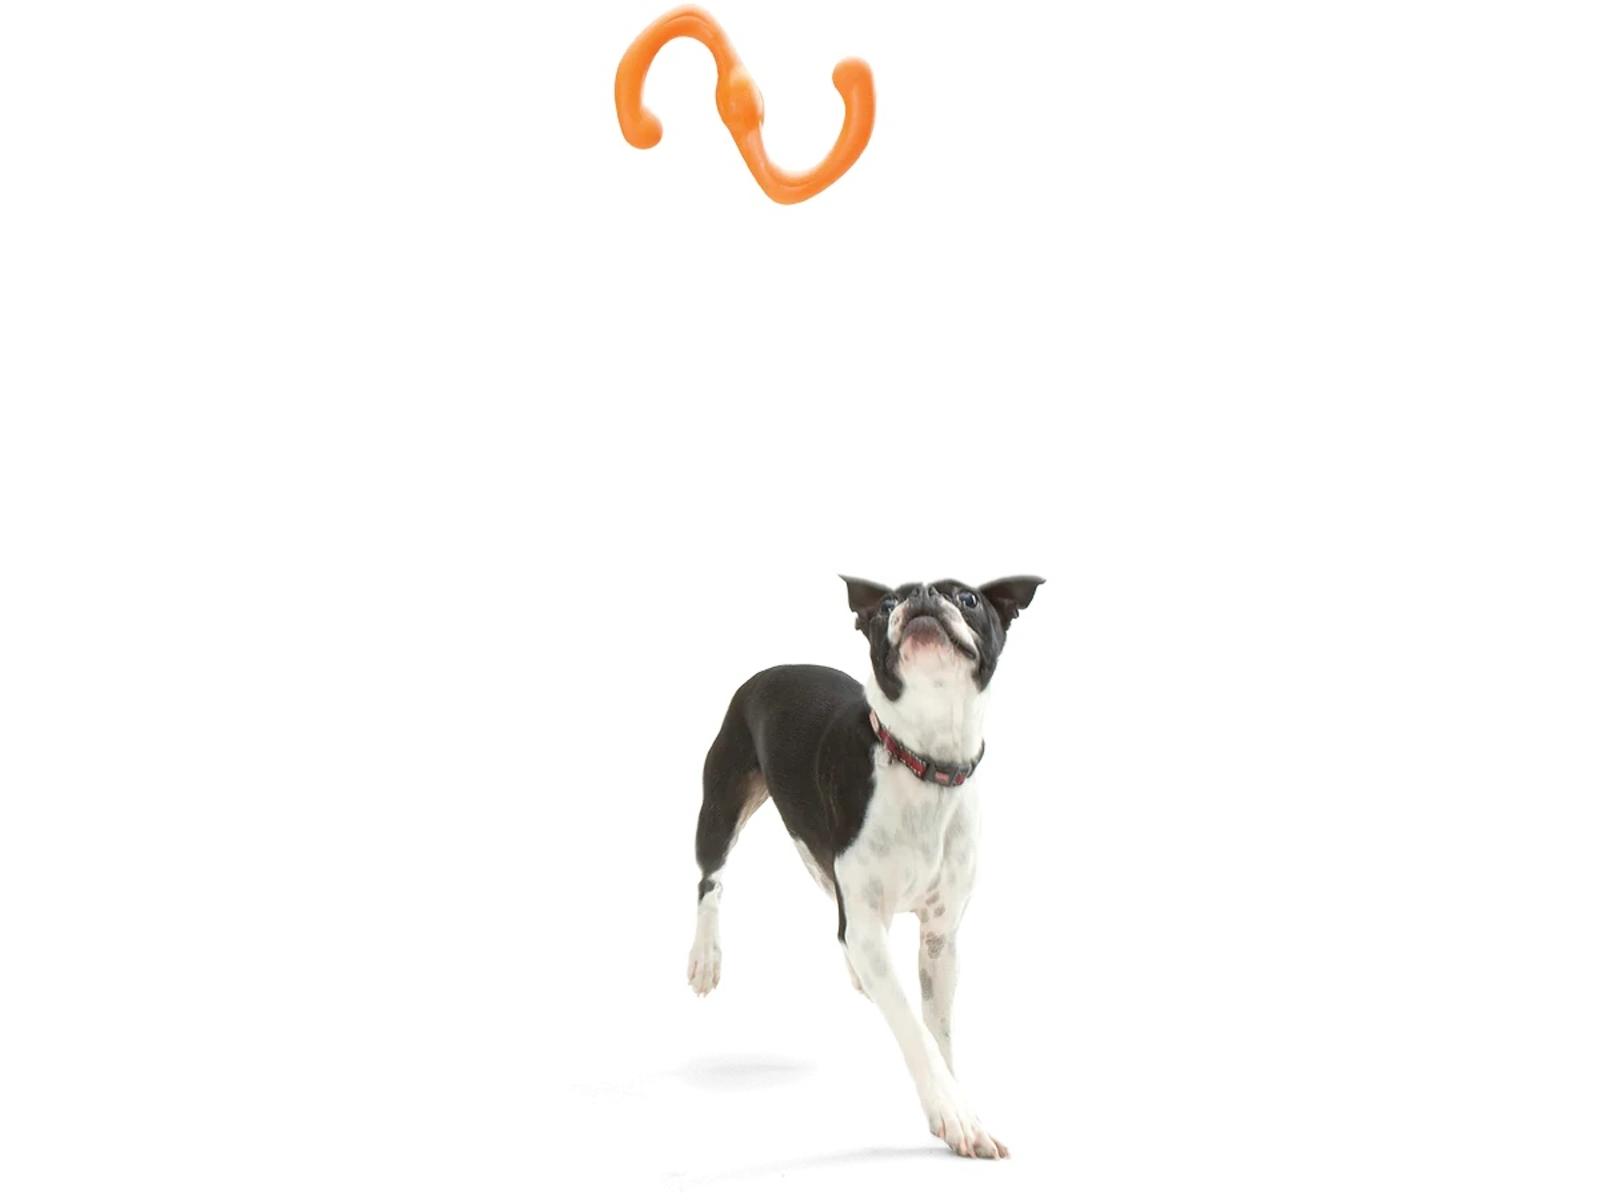 Bumi Dog Chew Toy in tangerine being played with by dog